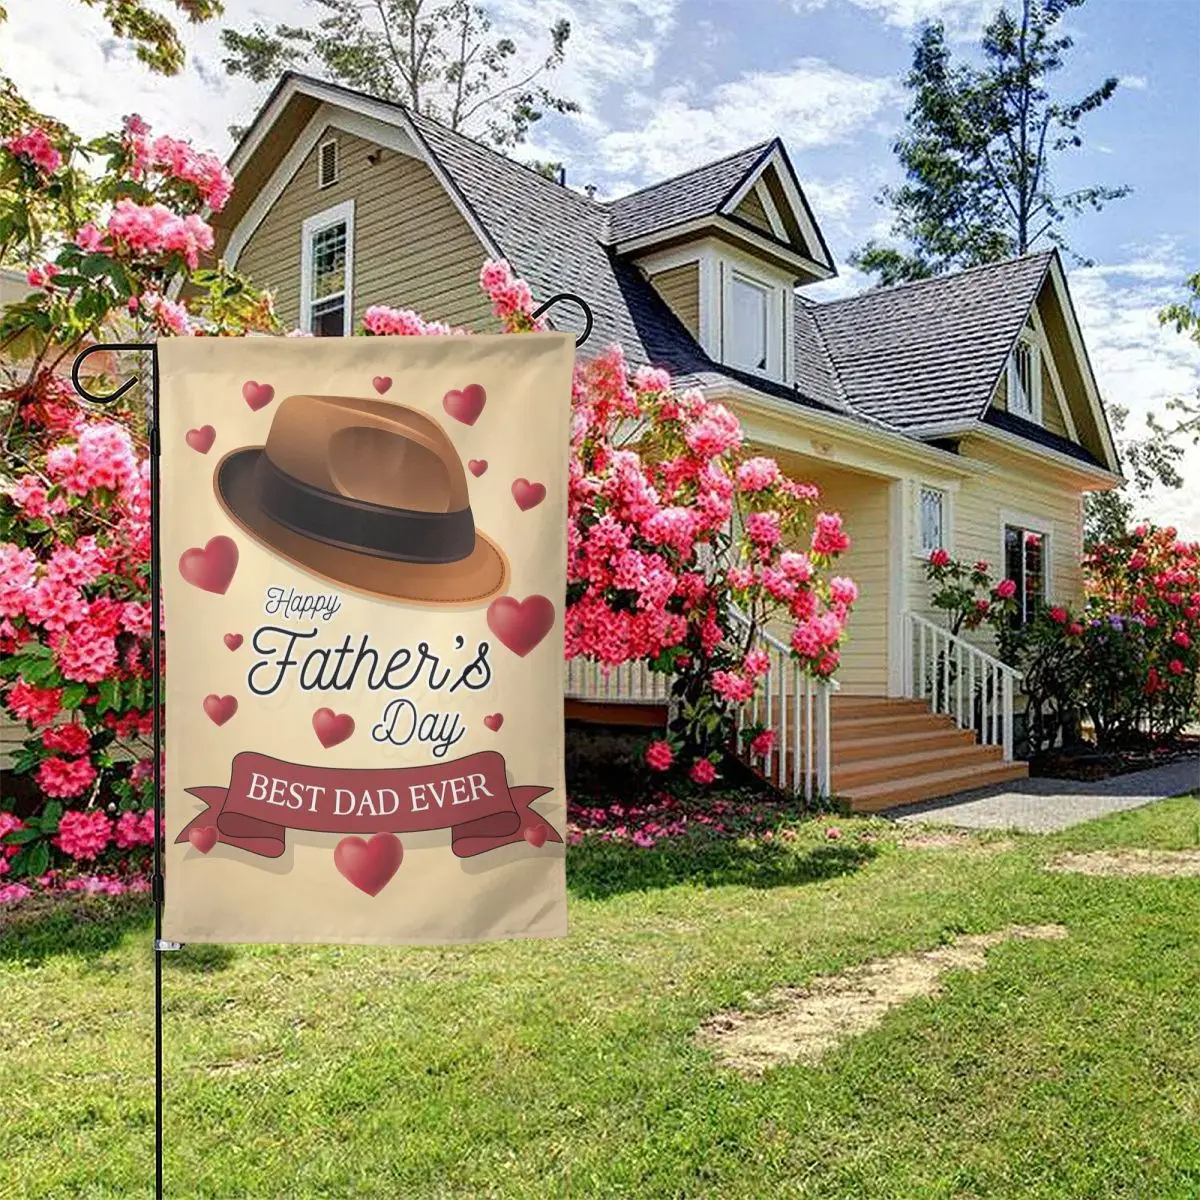 

America Forever Father's Day Garden Flag - Fedora And Hearts - World's Best Dad - Happy Father's Day Love Garden Flag